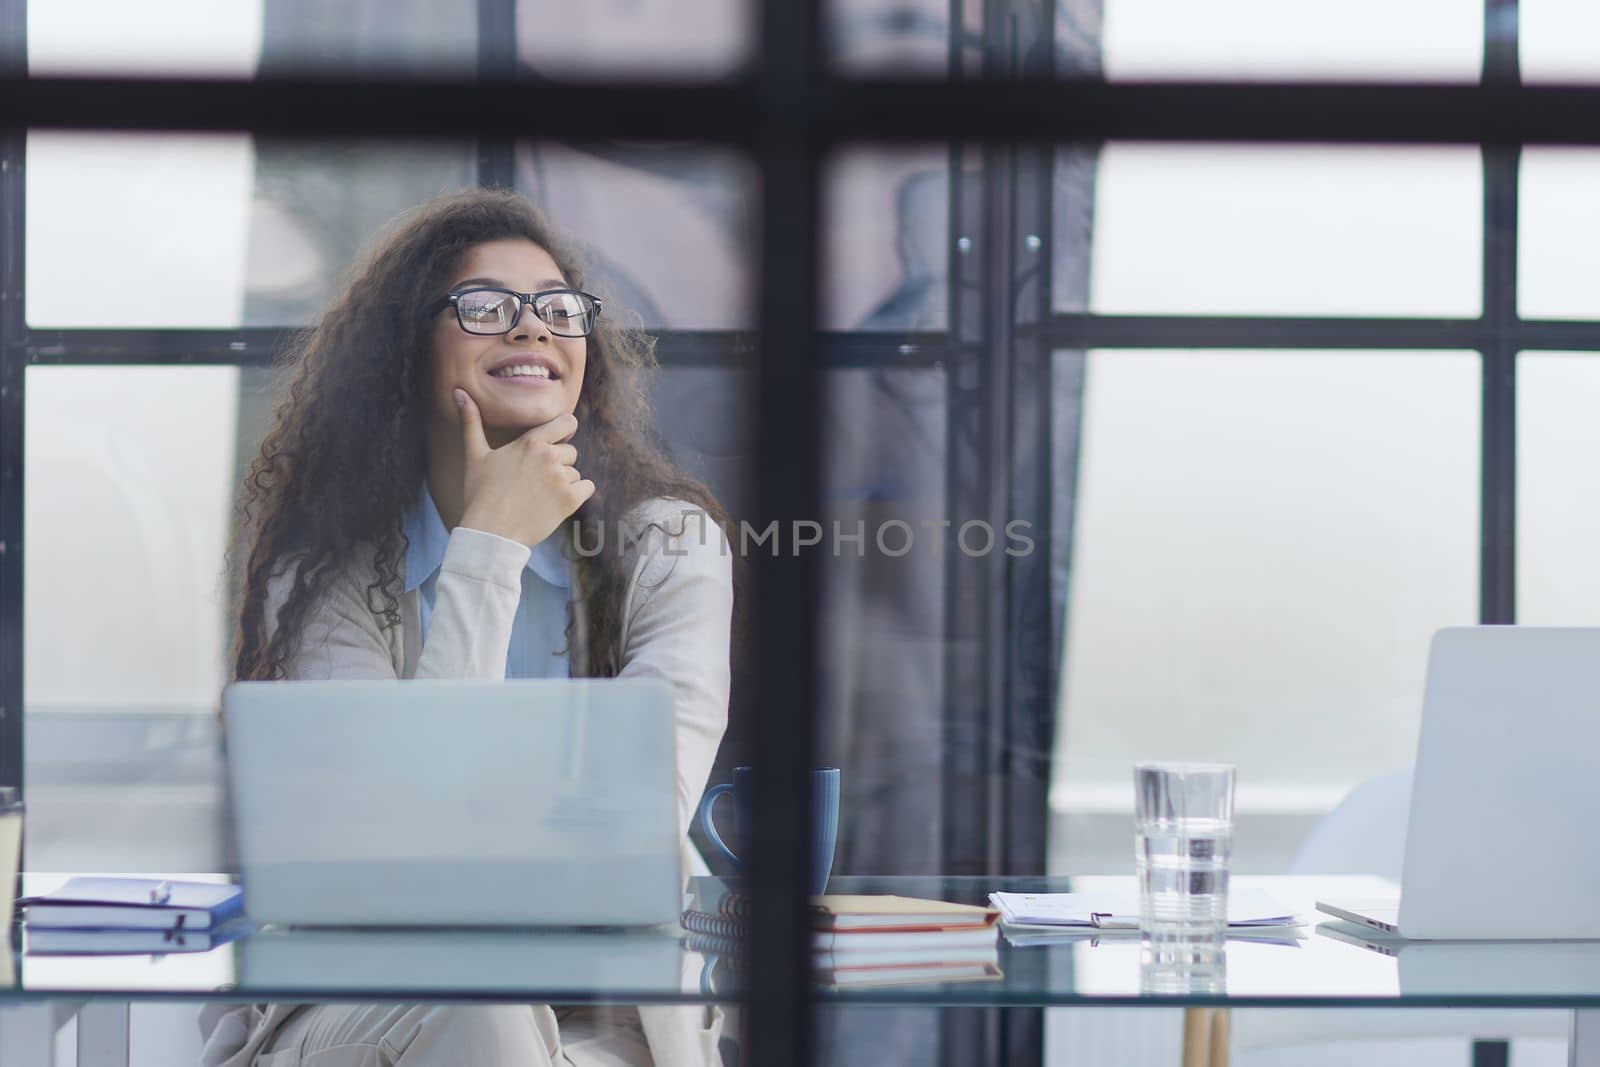 Young businesswoman using laptop at table in office